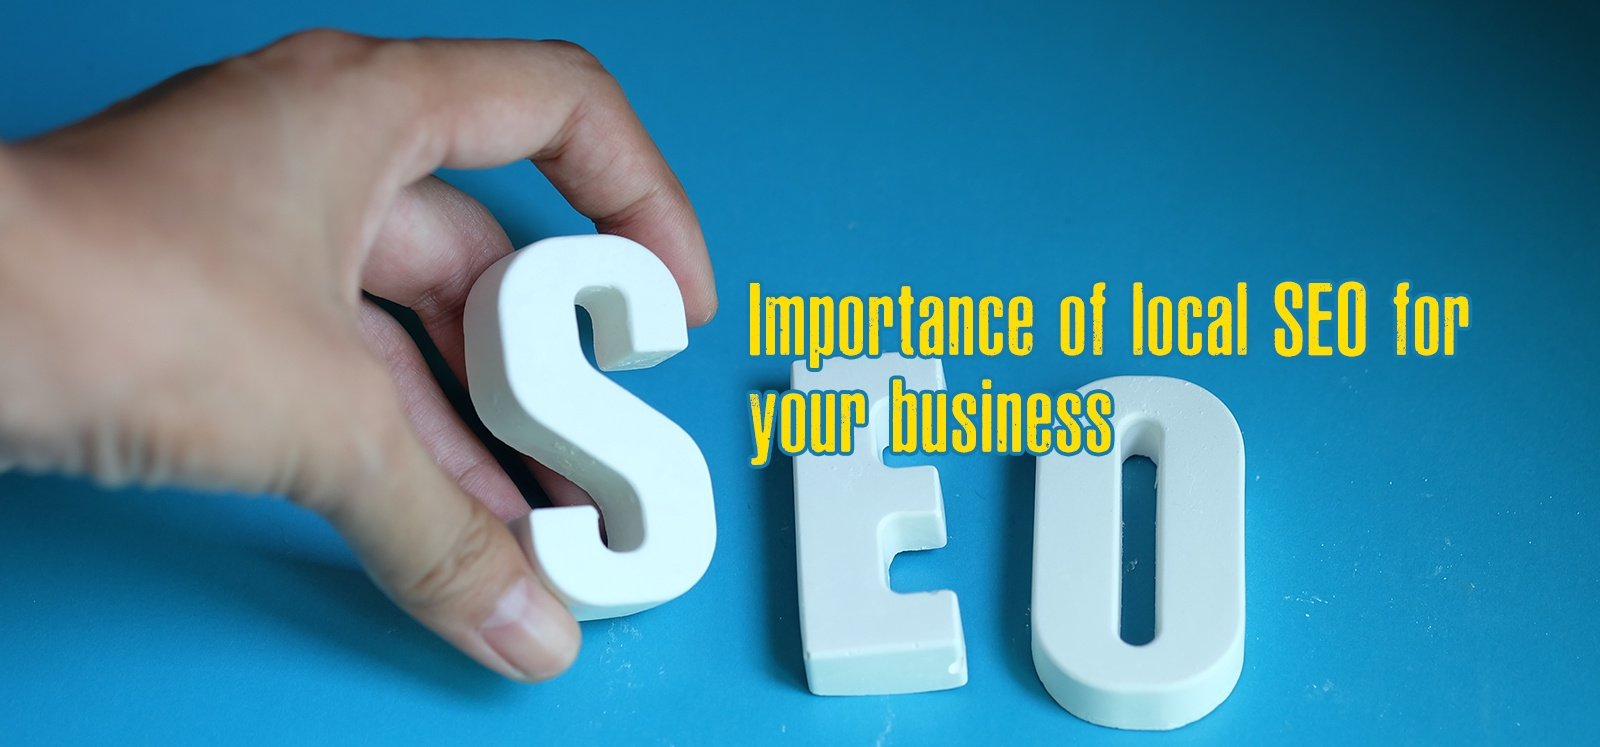 Importance of local SEO for your business